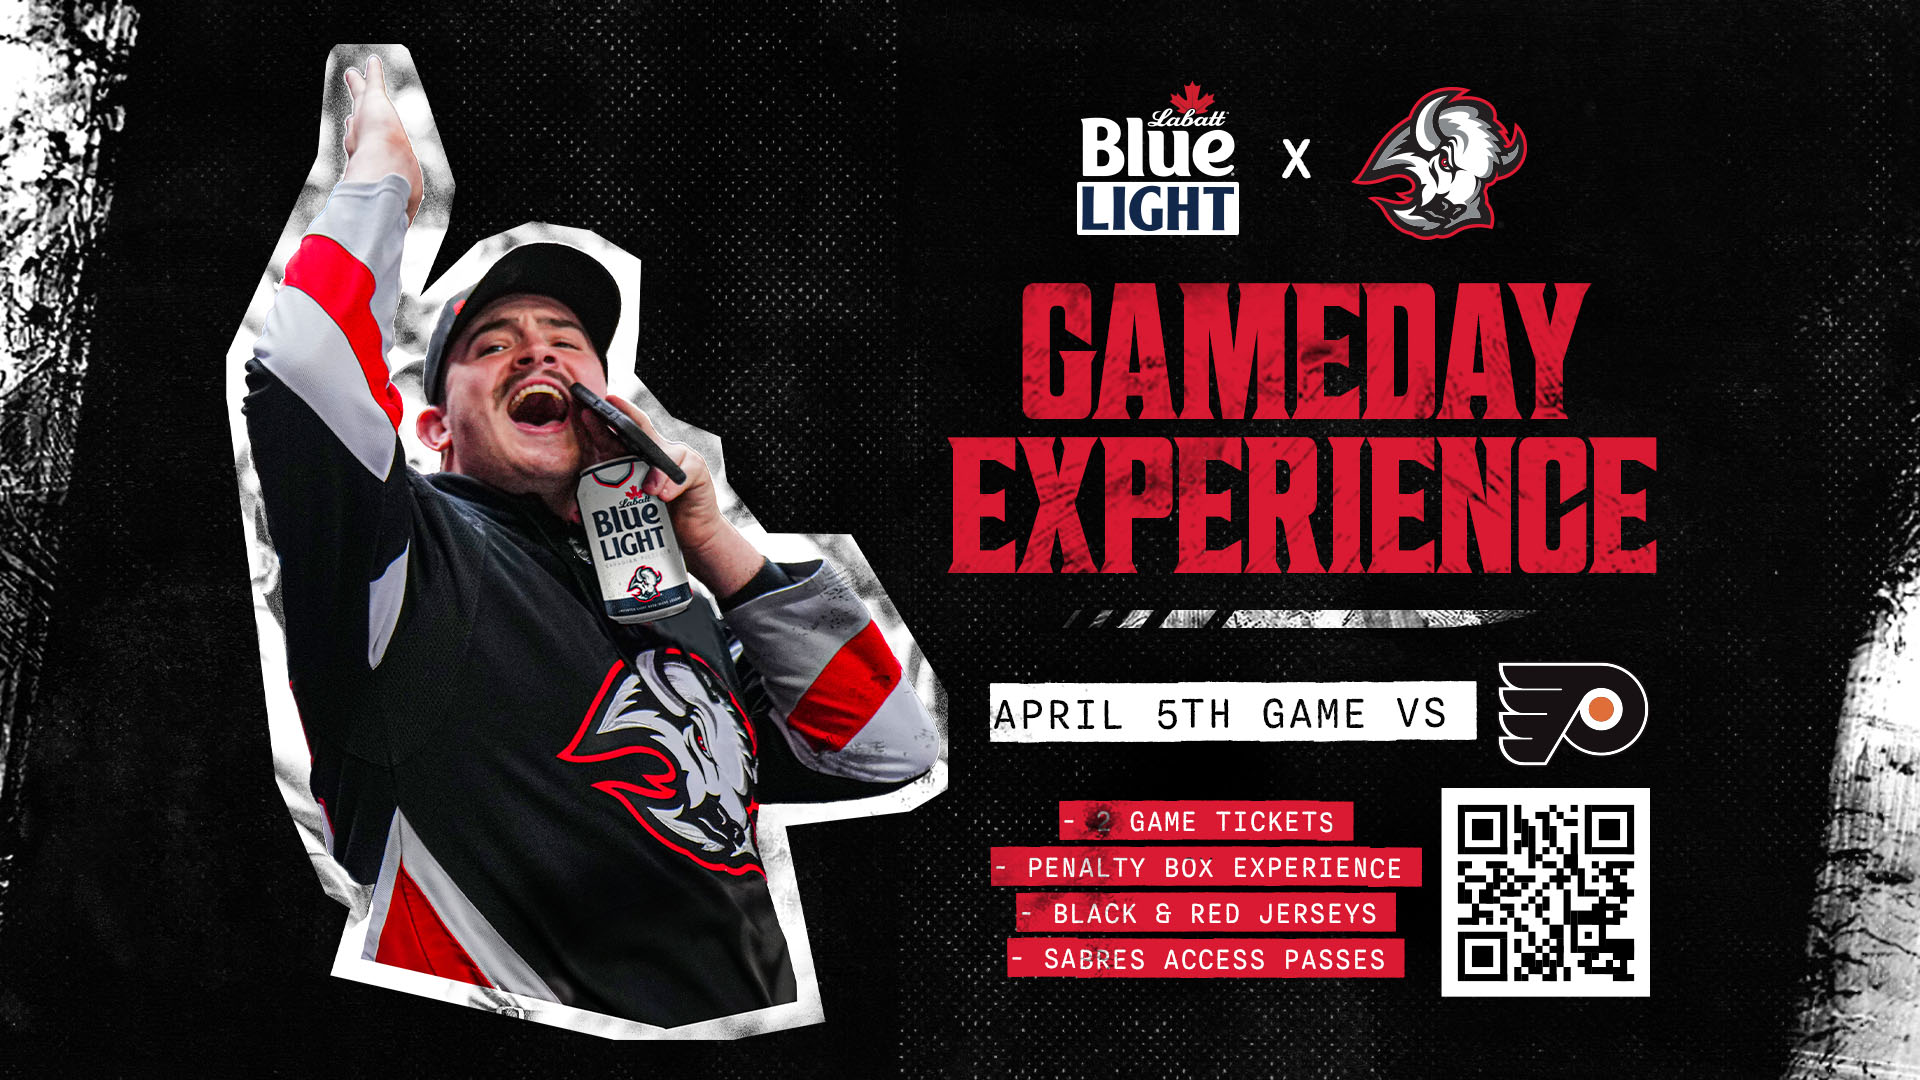 Enter for a chance to win a gameday experience at the Sabres game on April 5h